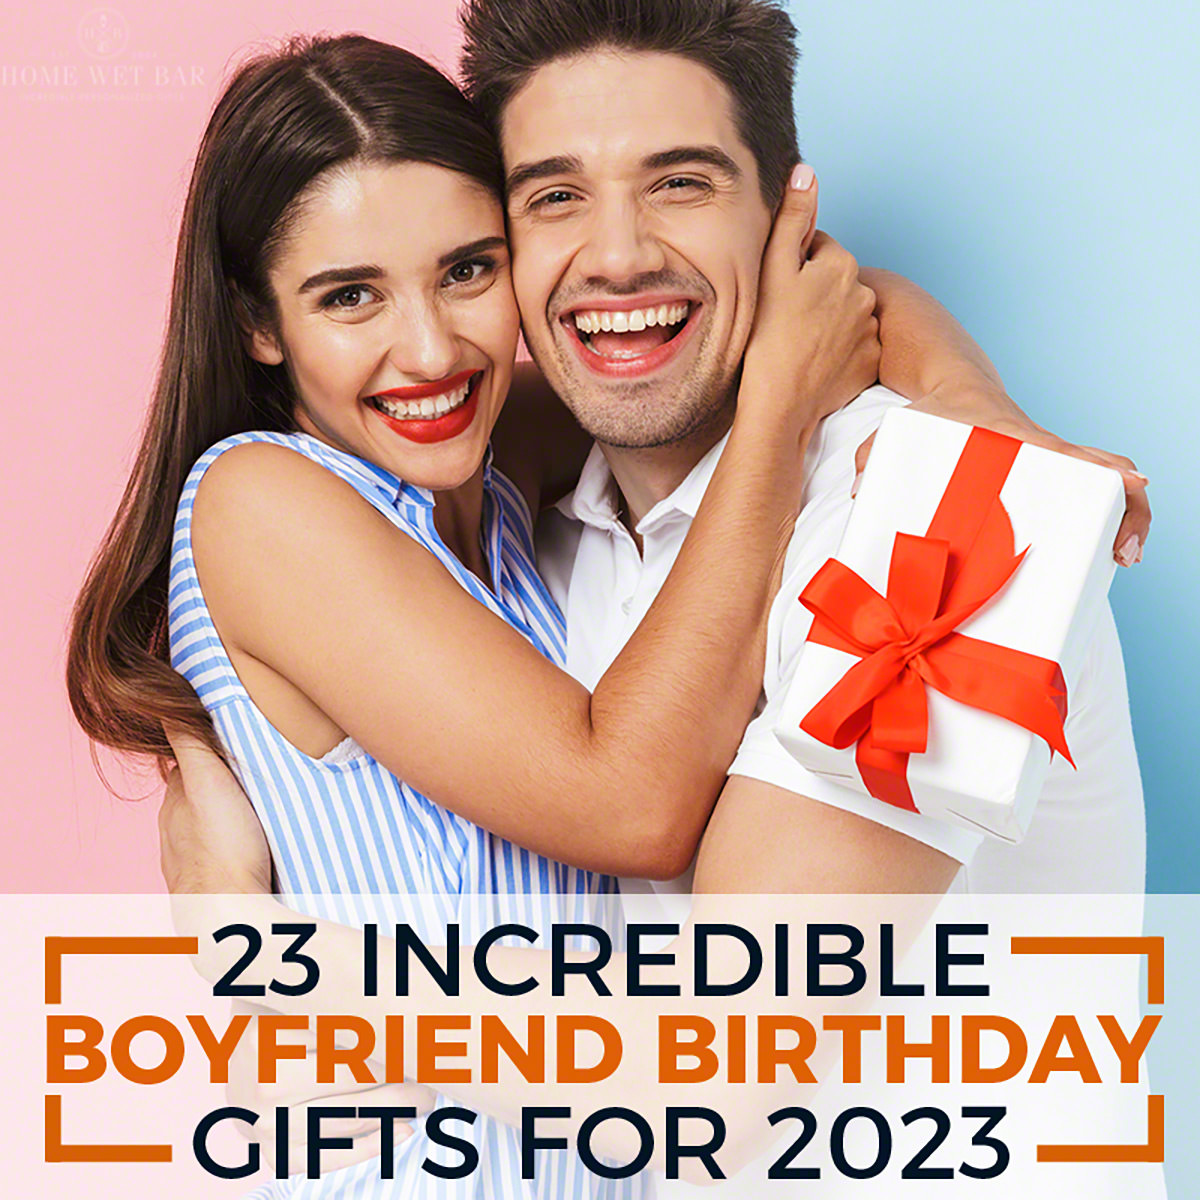 26 Good Boyfriend Birthday Gifts And Great Gift Ideas